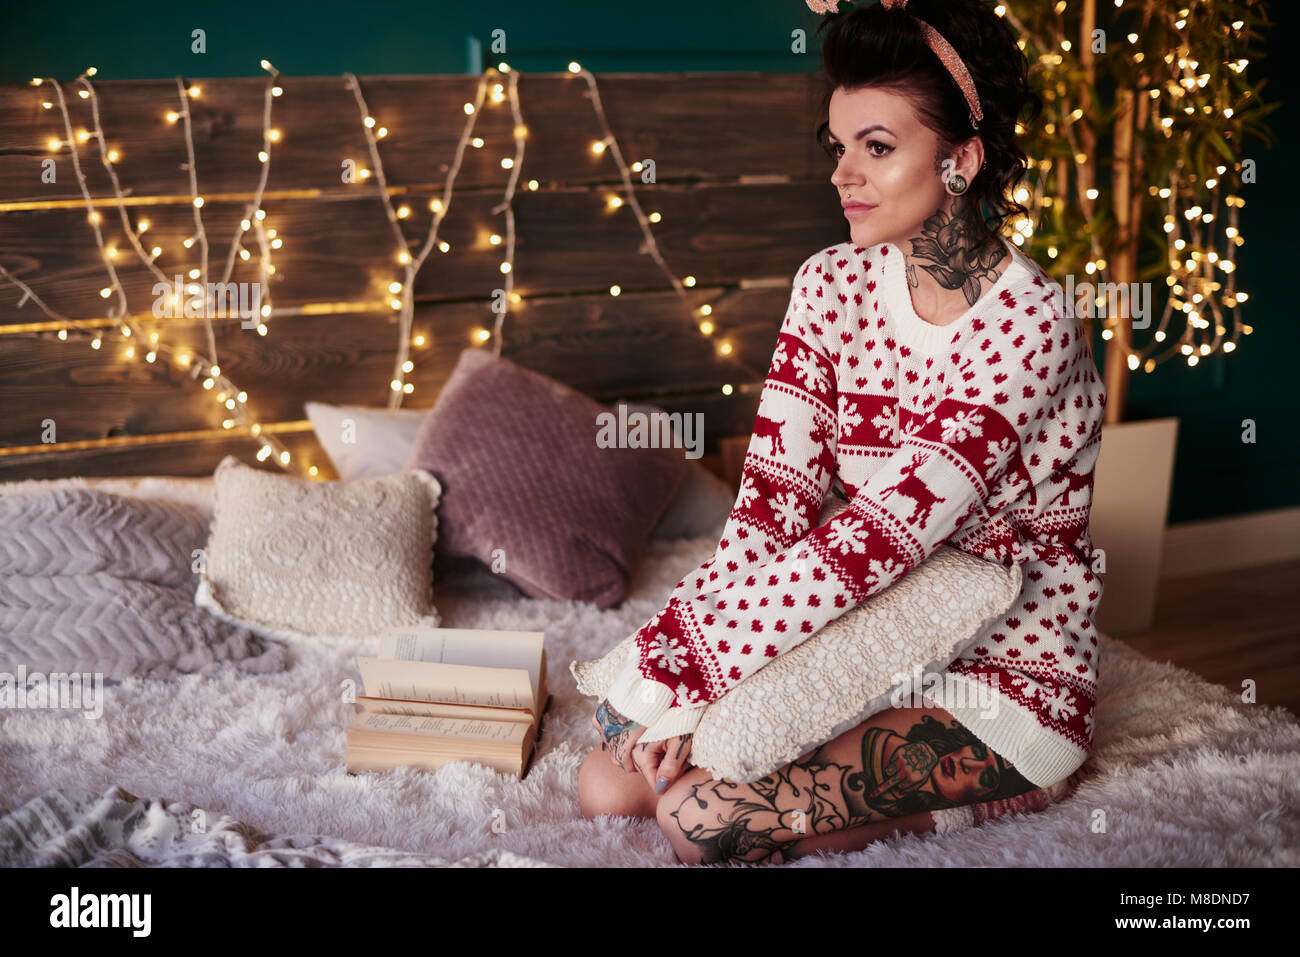 Young woman sitting on bed, wearing christmas jumper, thoughtful expression Stock Photo